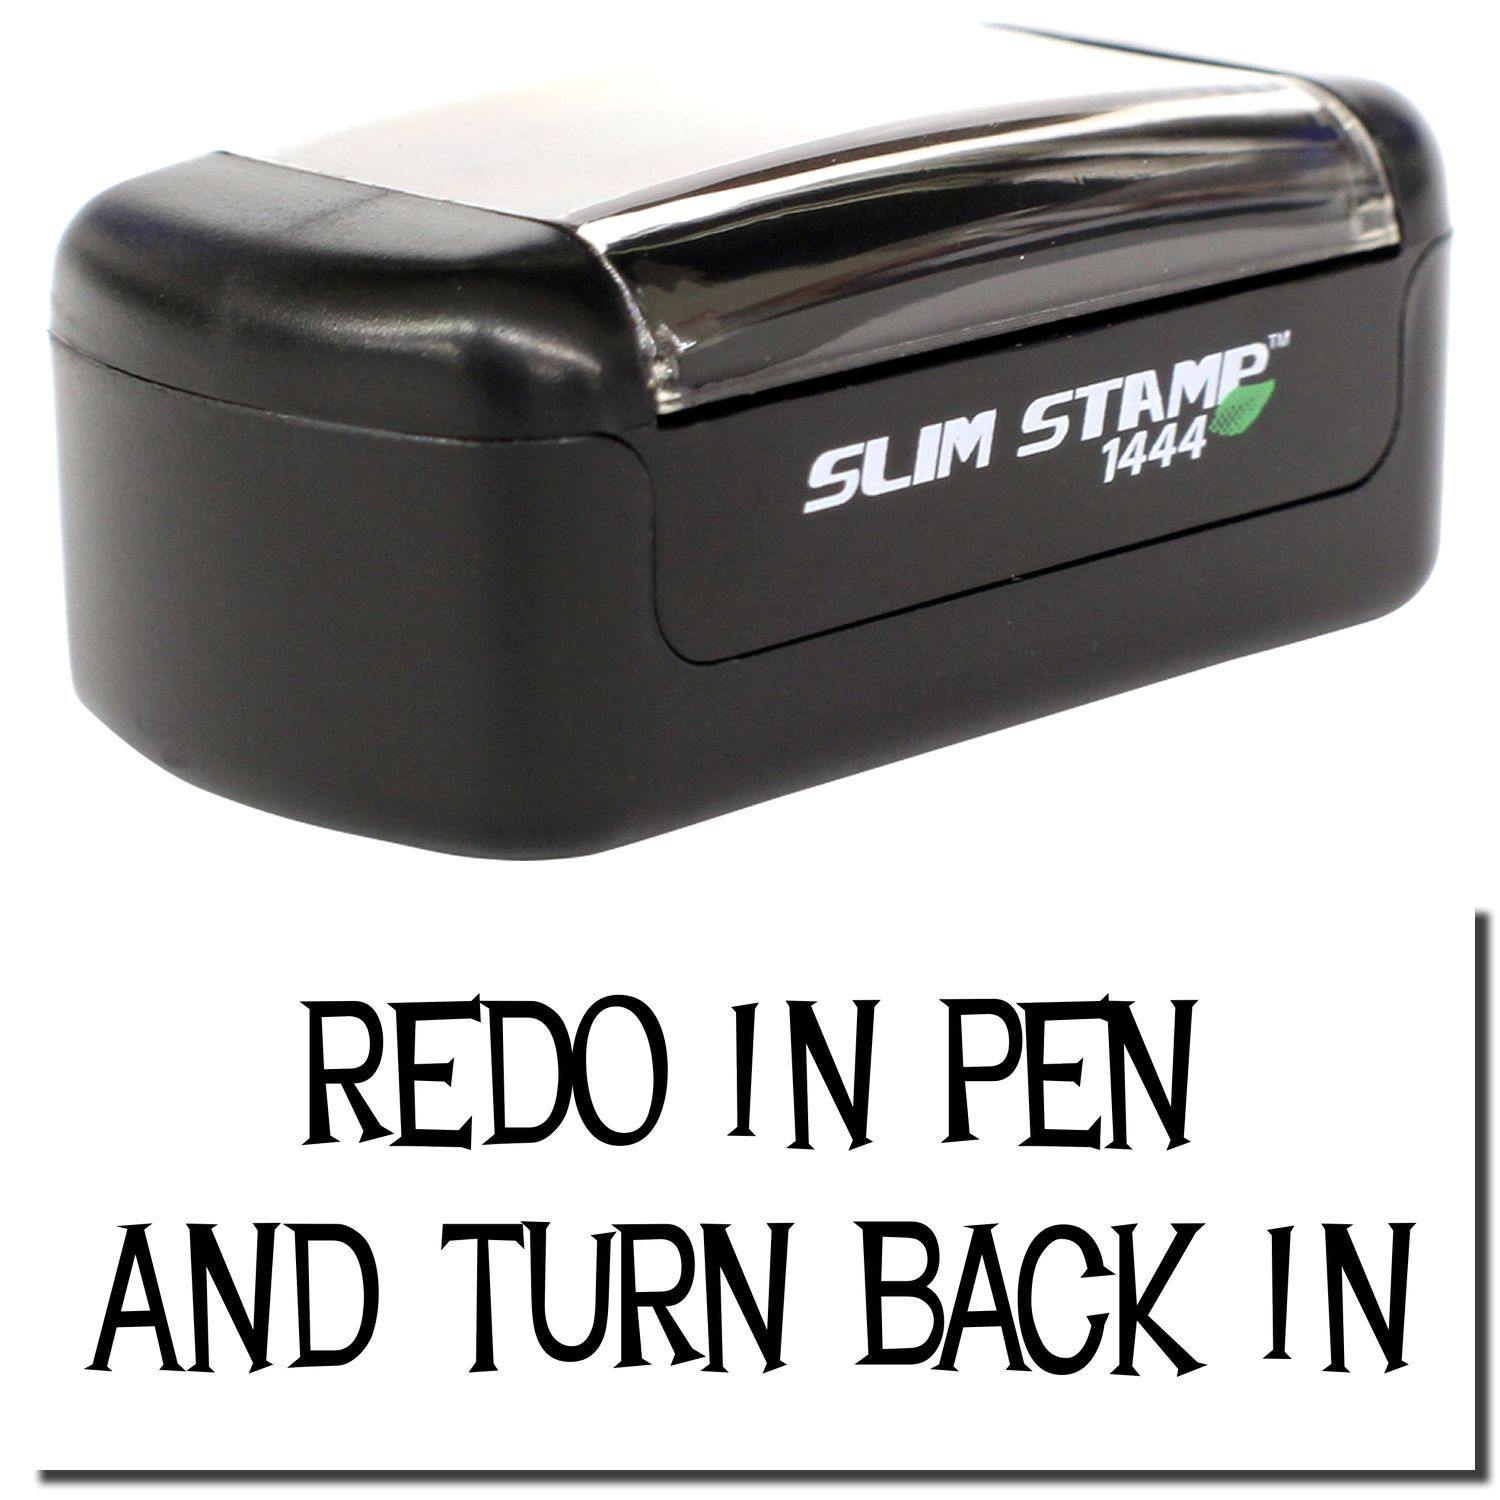 Slim Pre Inked Redo In Pencil And Turn Back Stamp Main Image